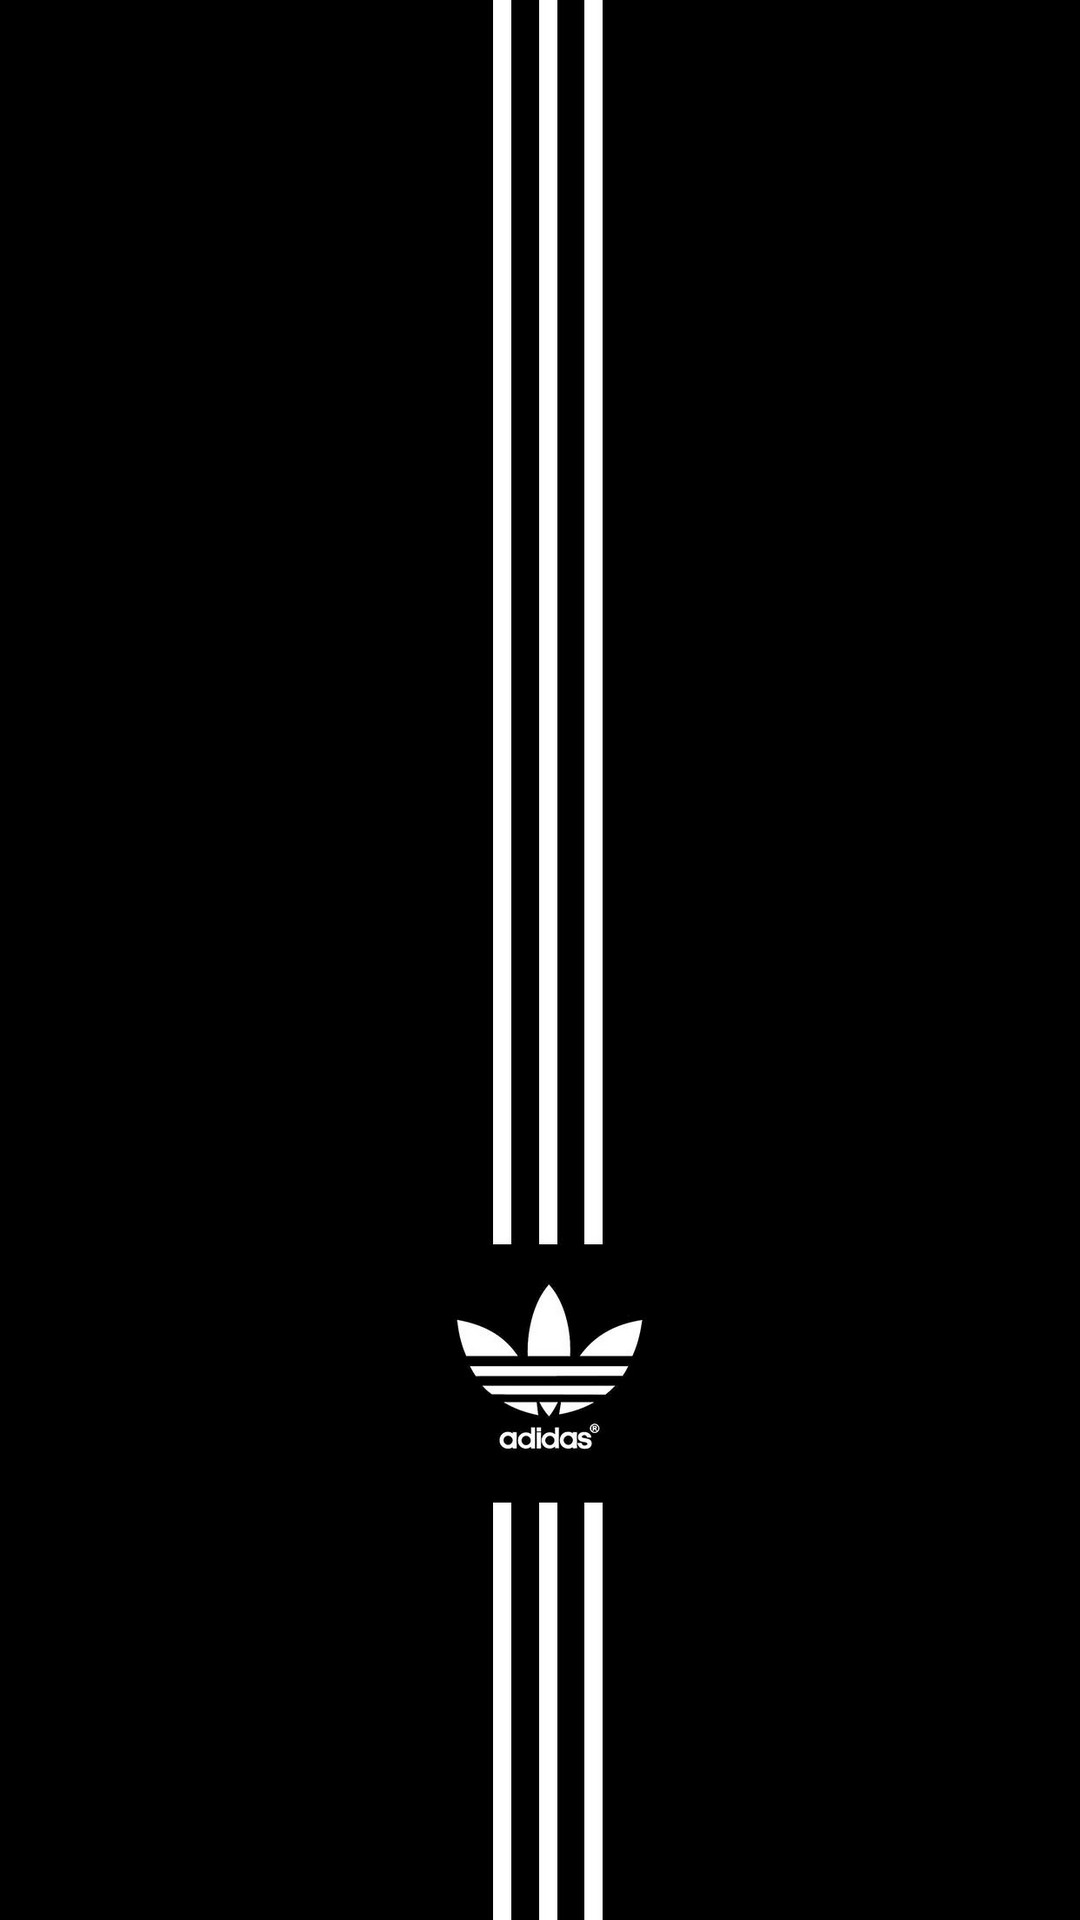 Adidas iPhone 6 Wallpaper HD with high-resolution 1080x1920 pixel. Download all Mobile Wallpapers and Use them as wallpapers for your iPhone, Tablet, iPad, Android and other mobile devices